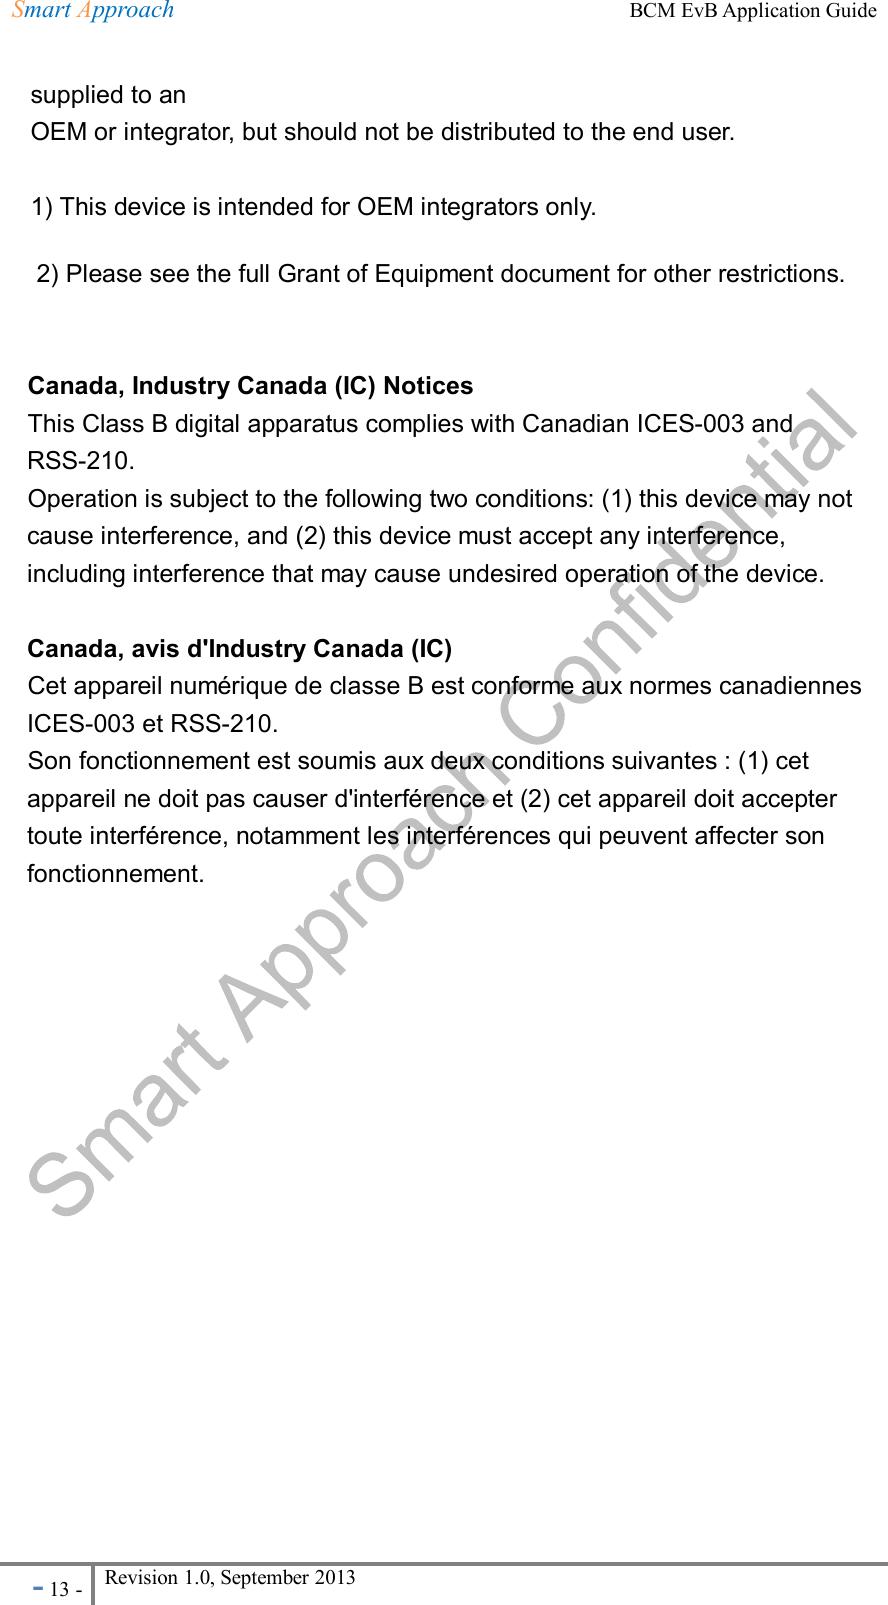 Smart Approach    BCM EvB Application Guide - 13 - Revision 1.0, September 2013                                                             supplied to an OEM or integrator, but should not be distributed to the end user.  1) This device is intended for OEM integrators only. 2) Please see the full Grant of Equipment document for other restrictions.   Canada, Industry Canada (IC) Notices   This Class B digital apparatus complies with Canadian ICES-003 and RSS-210.   Operation is subject to the following two conditions: (1) this device may not cause interference, and (2) this device must accept any interference, including interference that may cause undesired operation of the device.  Canada, avis d&apos;Industry Canada (IC)   Cet appareil numérique de classe B est conforme aux normes canadiennes ICES-003 et RSS-210.   Son fonctionnement est soumis aux deux conditions suivantes : (1) cet appareil ne doit pas causer d&apos;interférence et (2) cet appareil doit accepter toute interférence, notamment les interférences qui peuvent affecter son fonctionnement.    